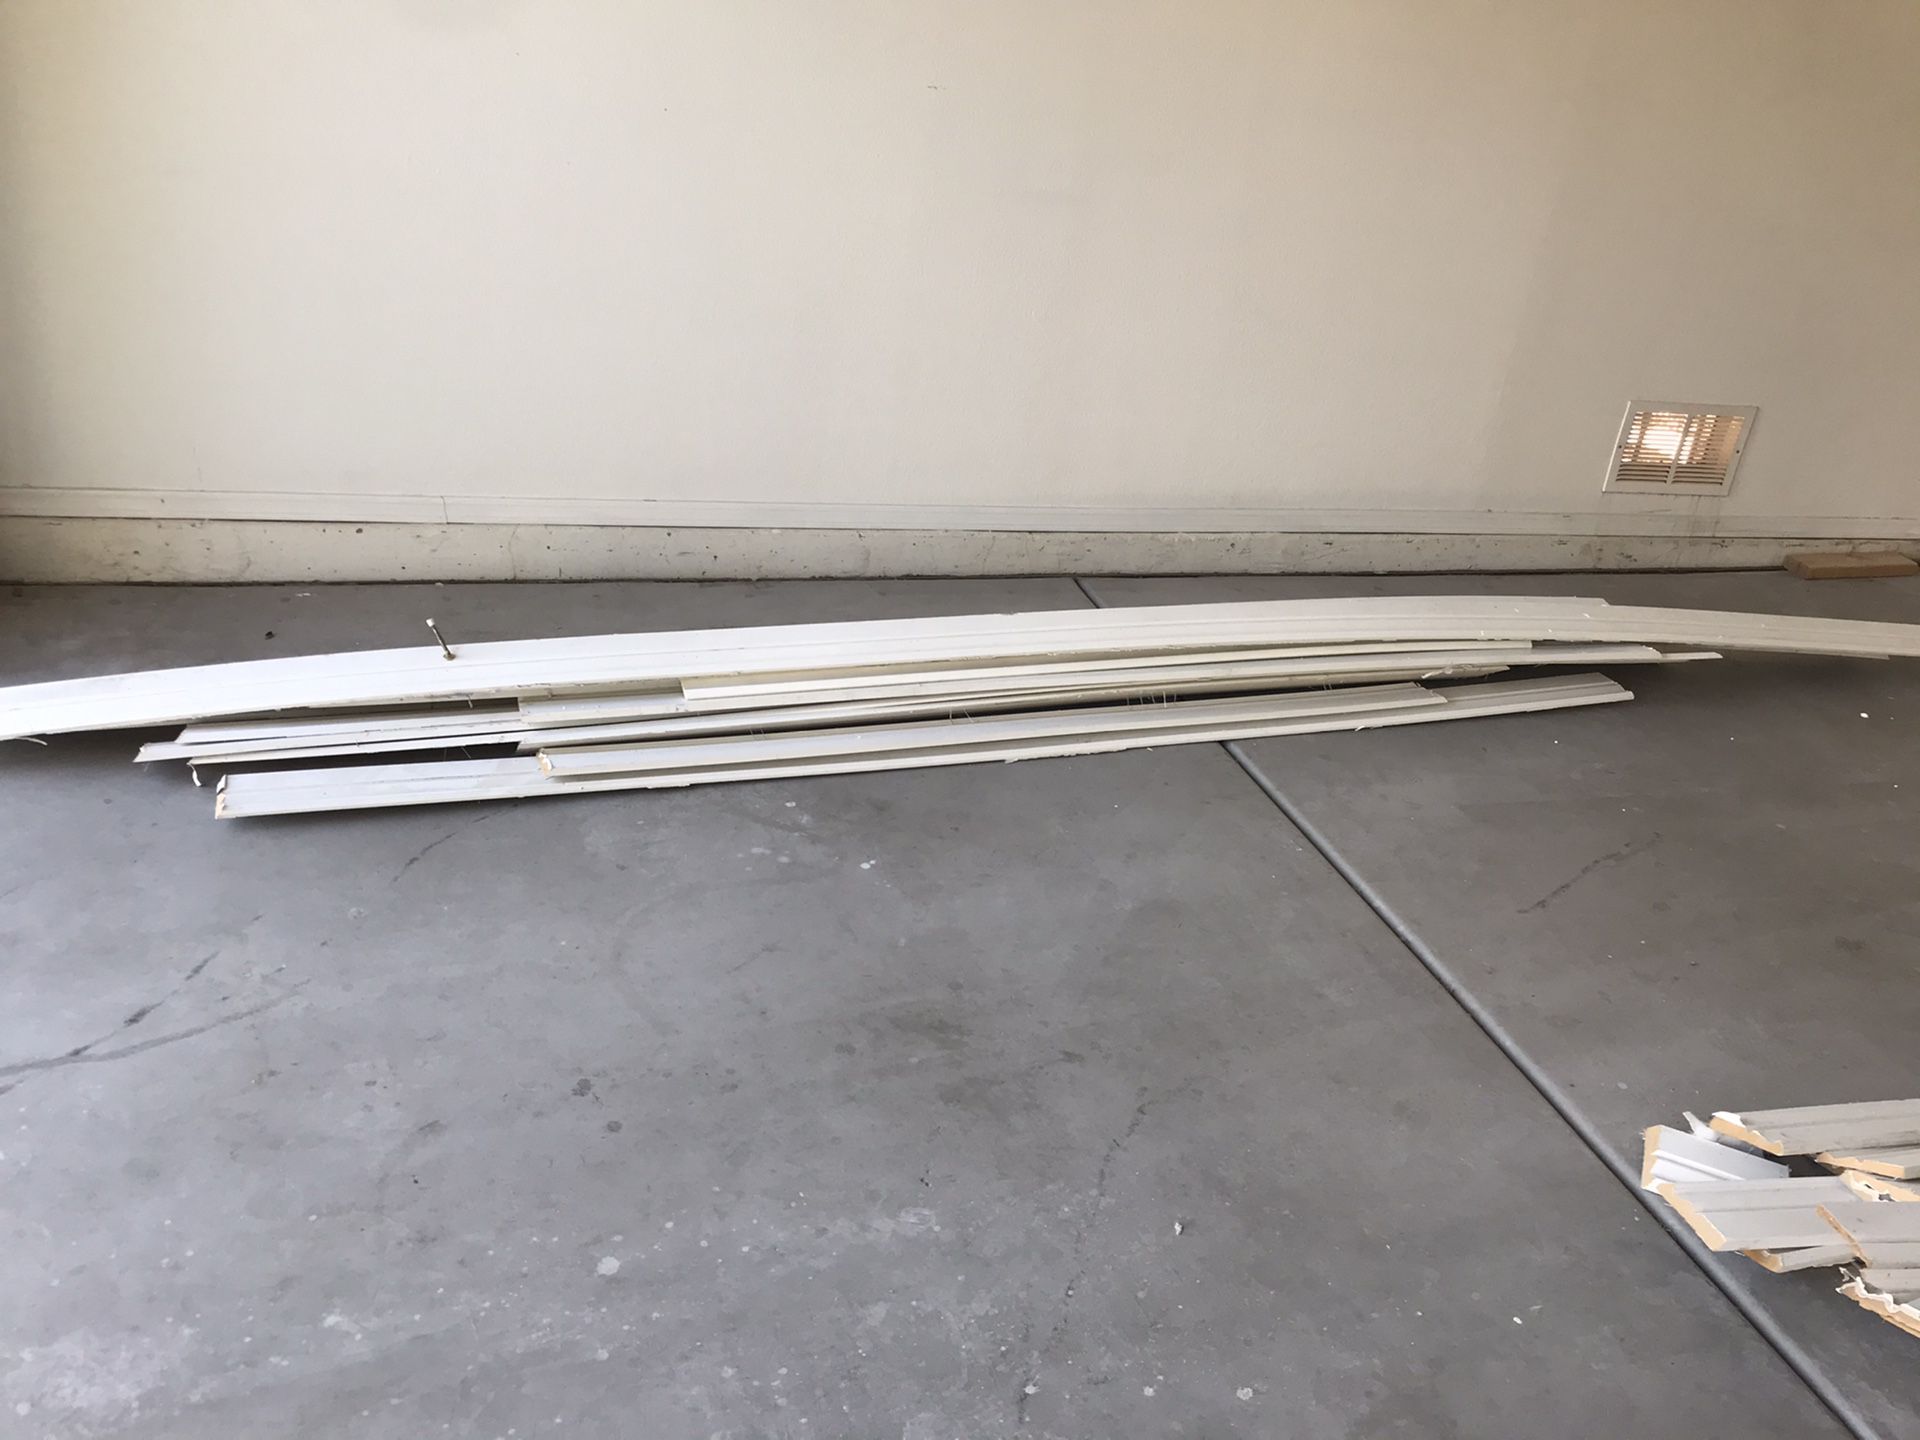 Used baseboards long 14 ft is longest and other pile is shorter